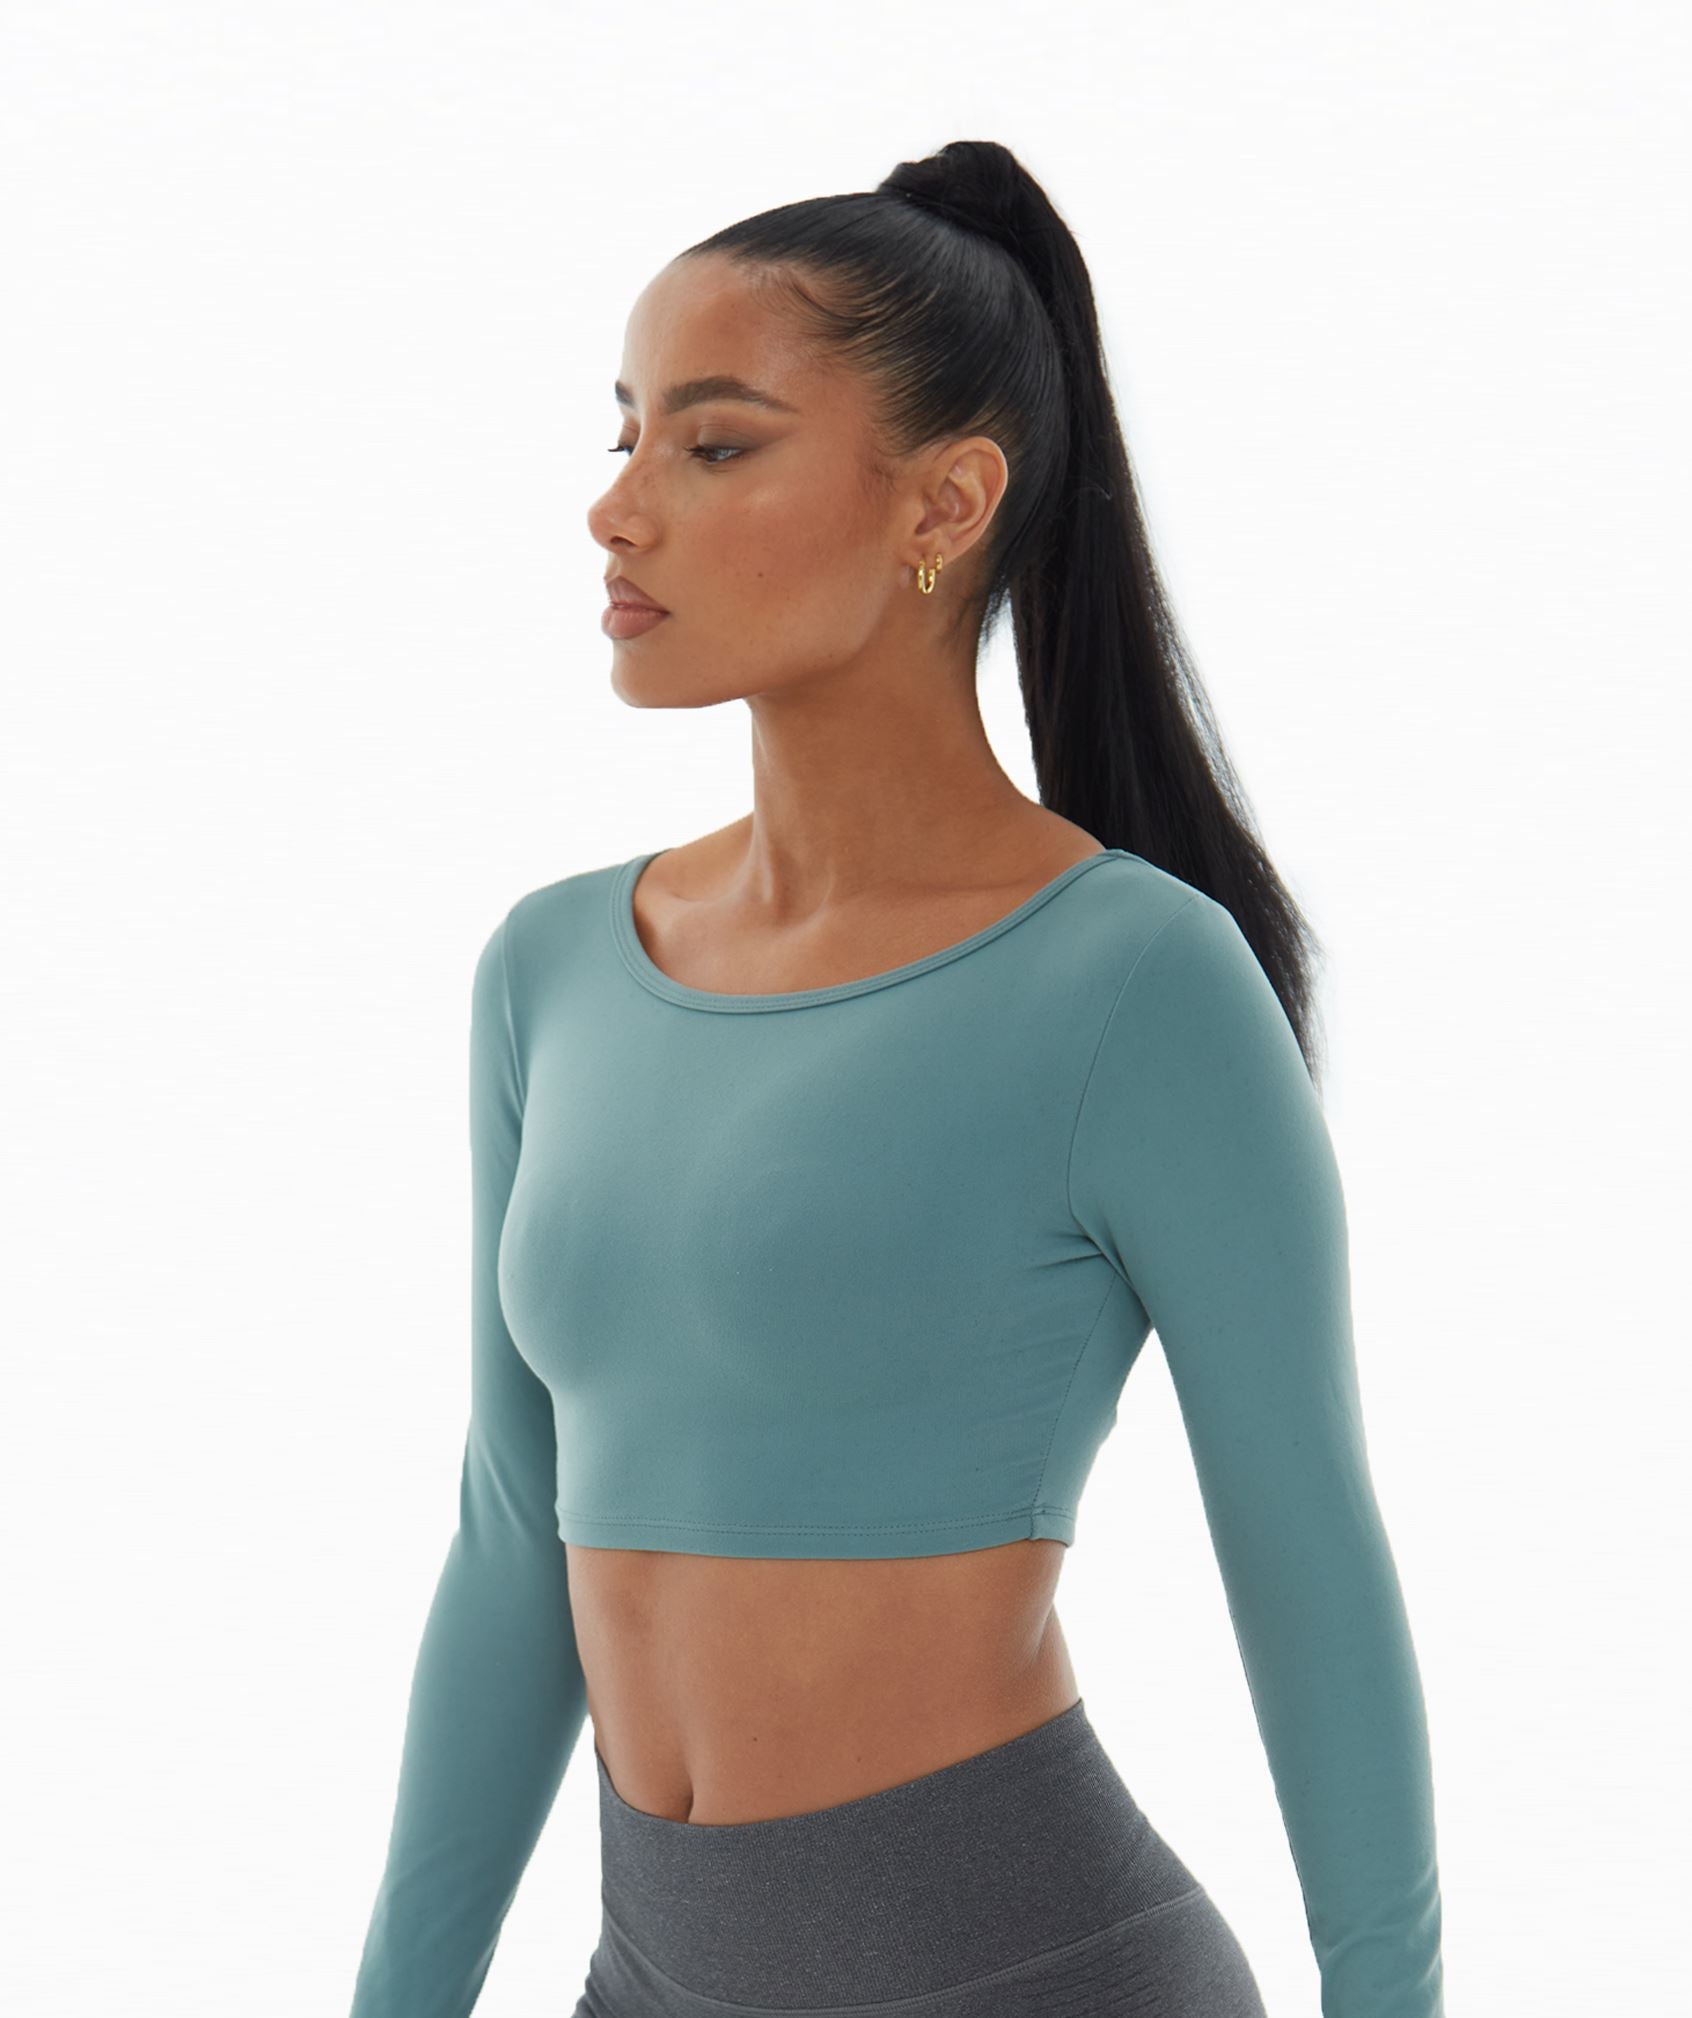  OZICERD Backless Workout Tops for Women Long Sleeve